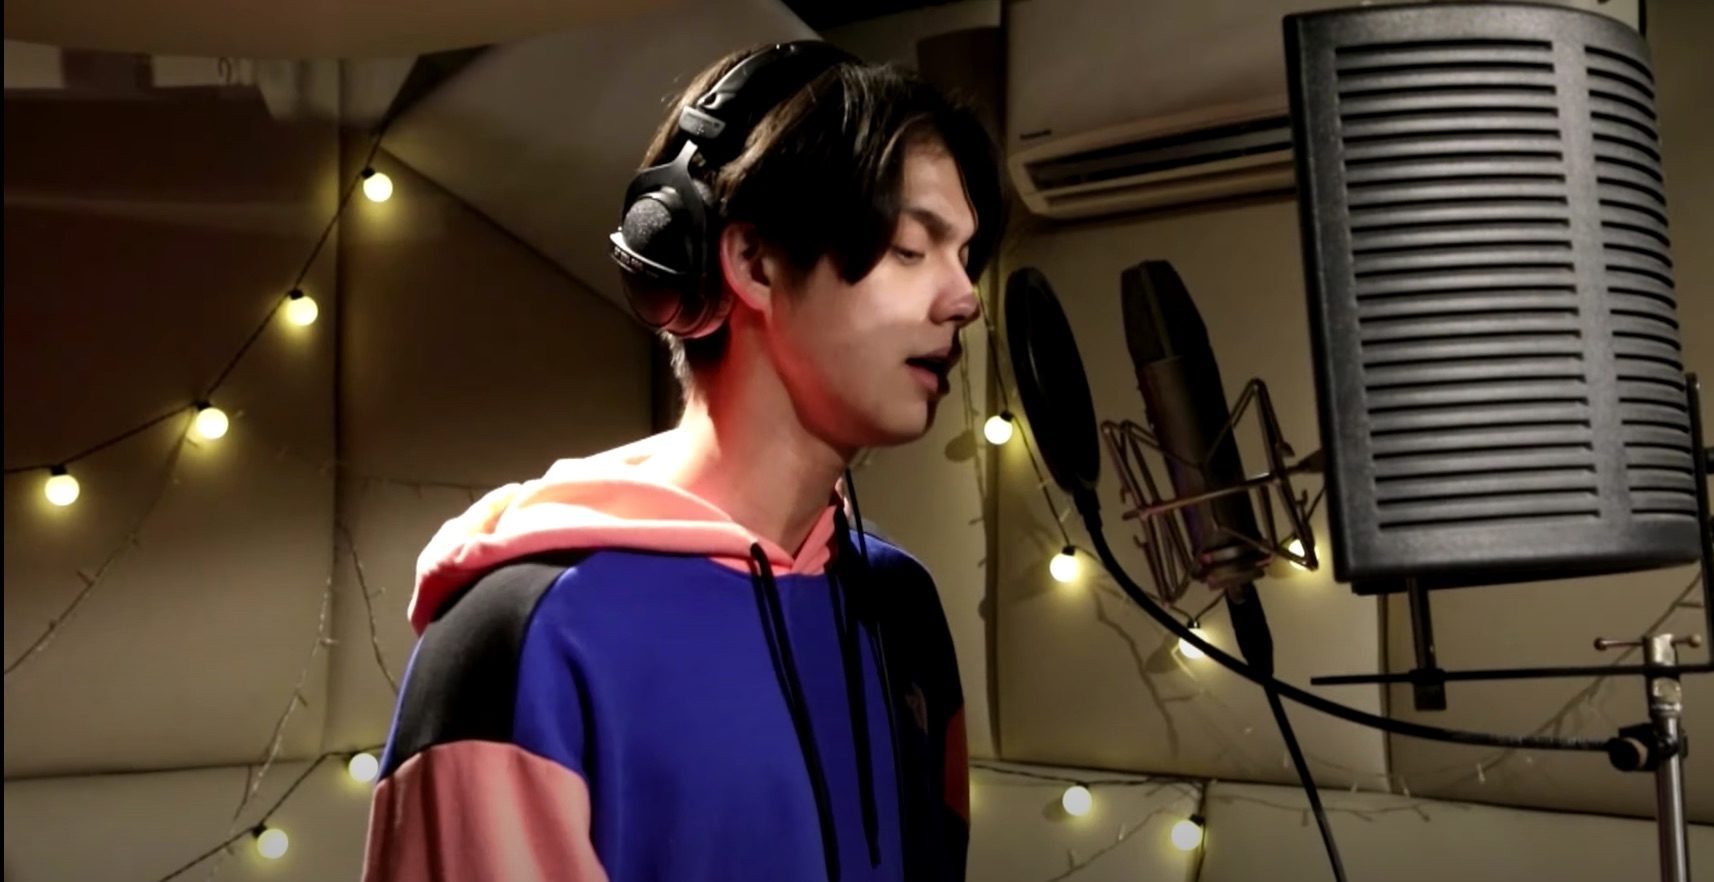 WATCH: Bright Vachirawit covers the Eraserheads classic ‘With A Smile’